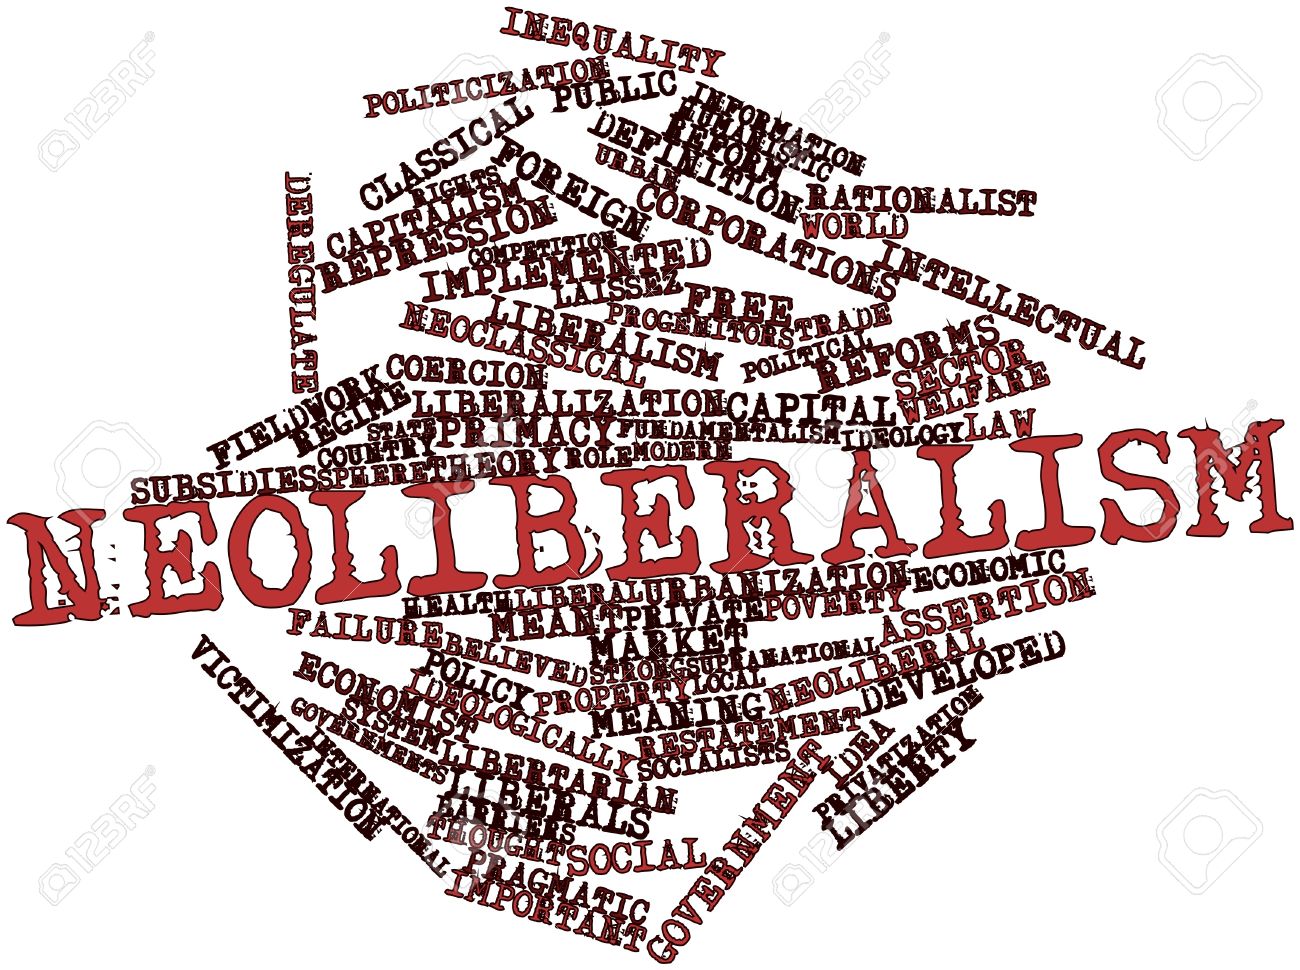 17149339-abstract-word-cloud-for-neoliberalism-with-related-tags-and-terms-stock-photo Neoliberal Kültür